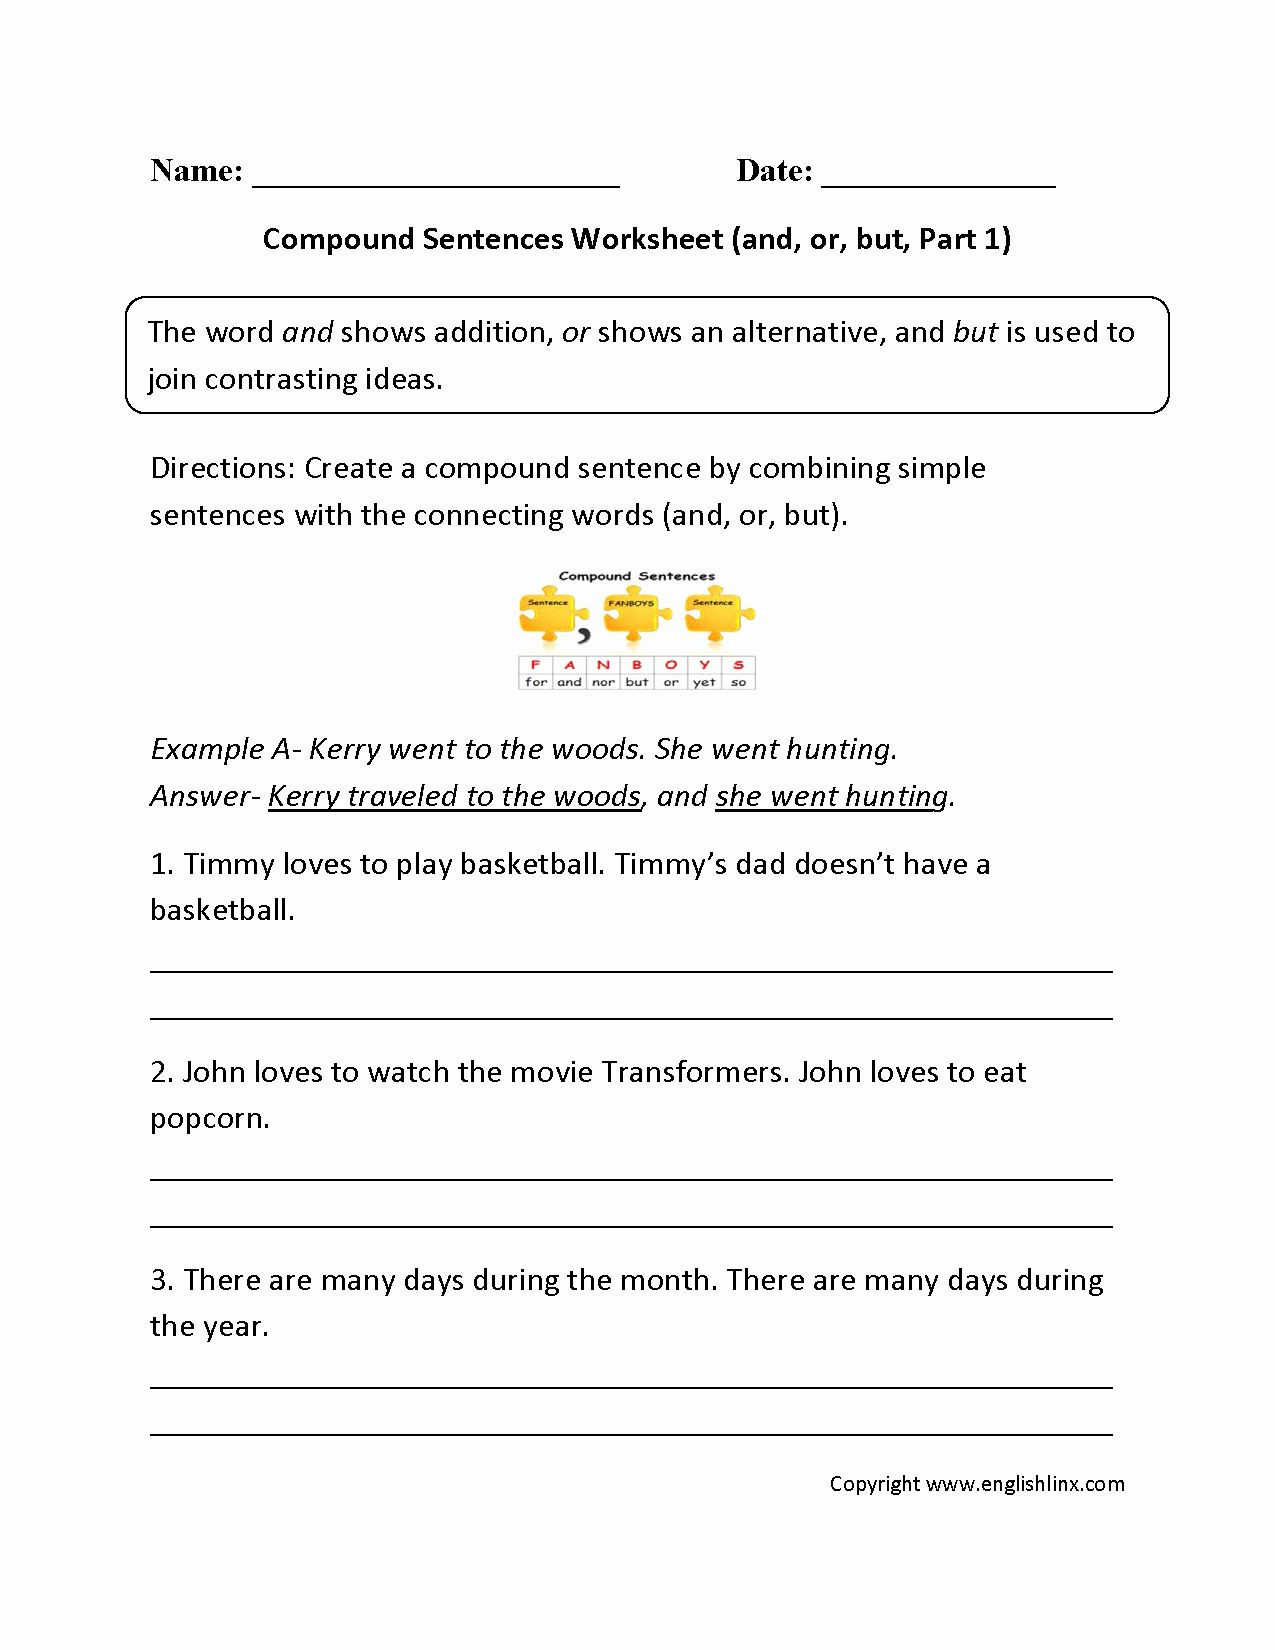 Compound Sentences Worksheet with Answers Pin On Customize Design Worksheet Line